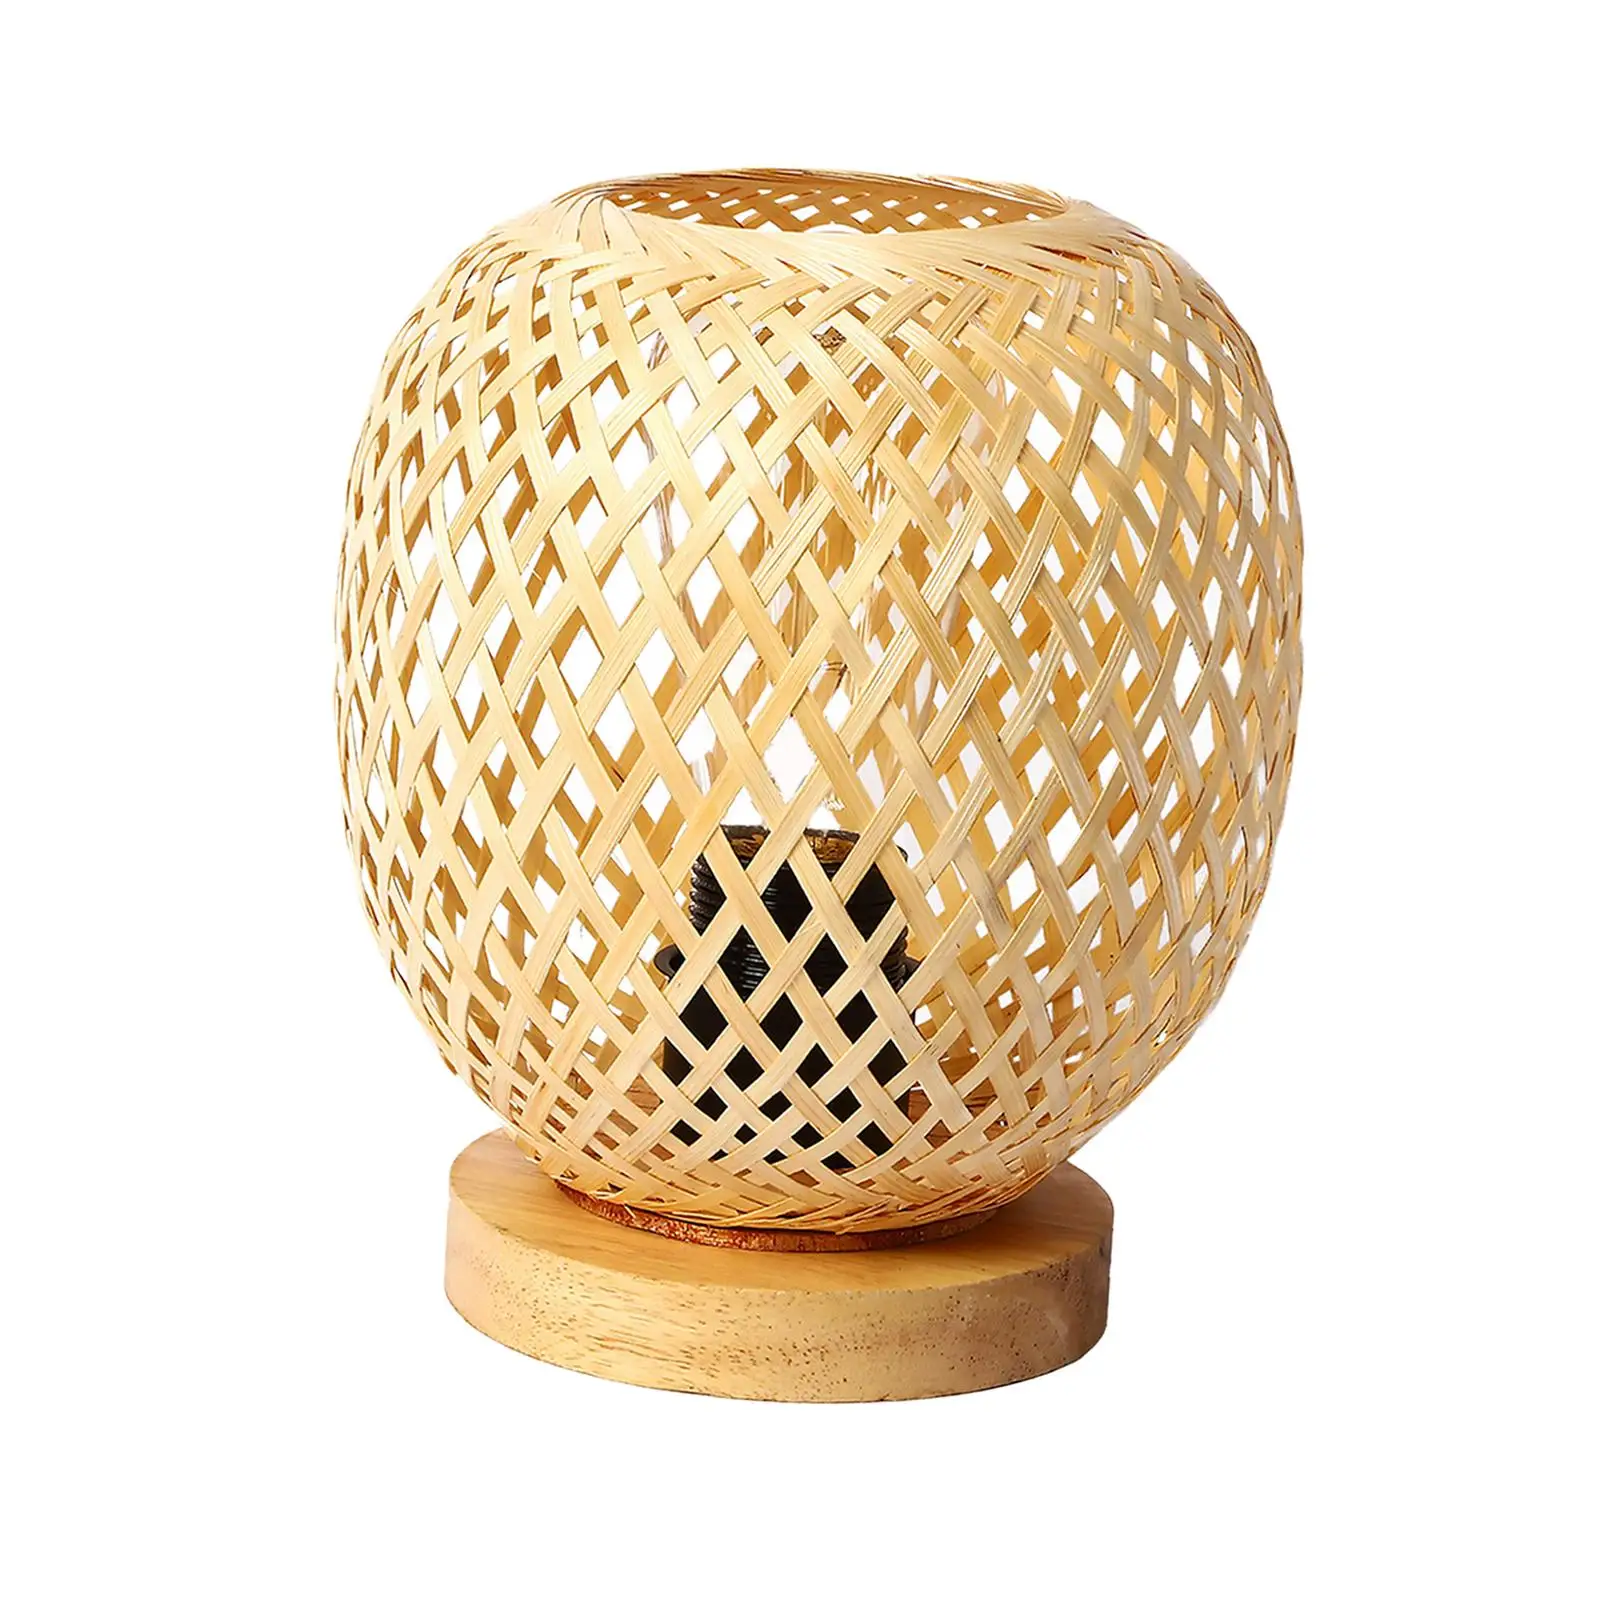 Rattan Table Lamps Standing Lamp Desk Lamp Decorative Devices W/ Wooden Base Rustic for Bedside Home Photo Props Bedroom US Plug